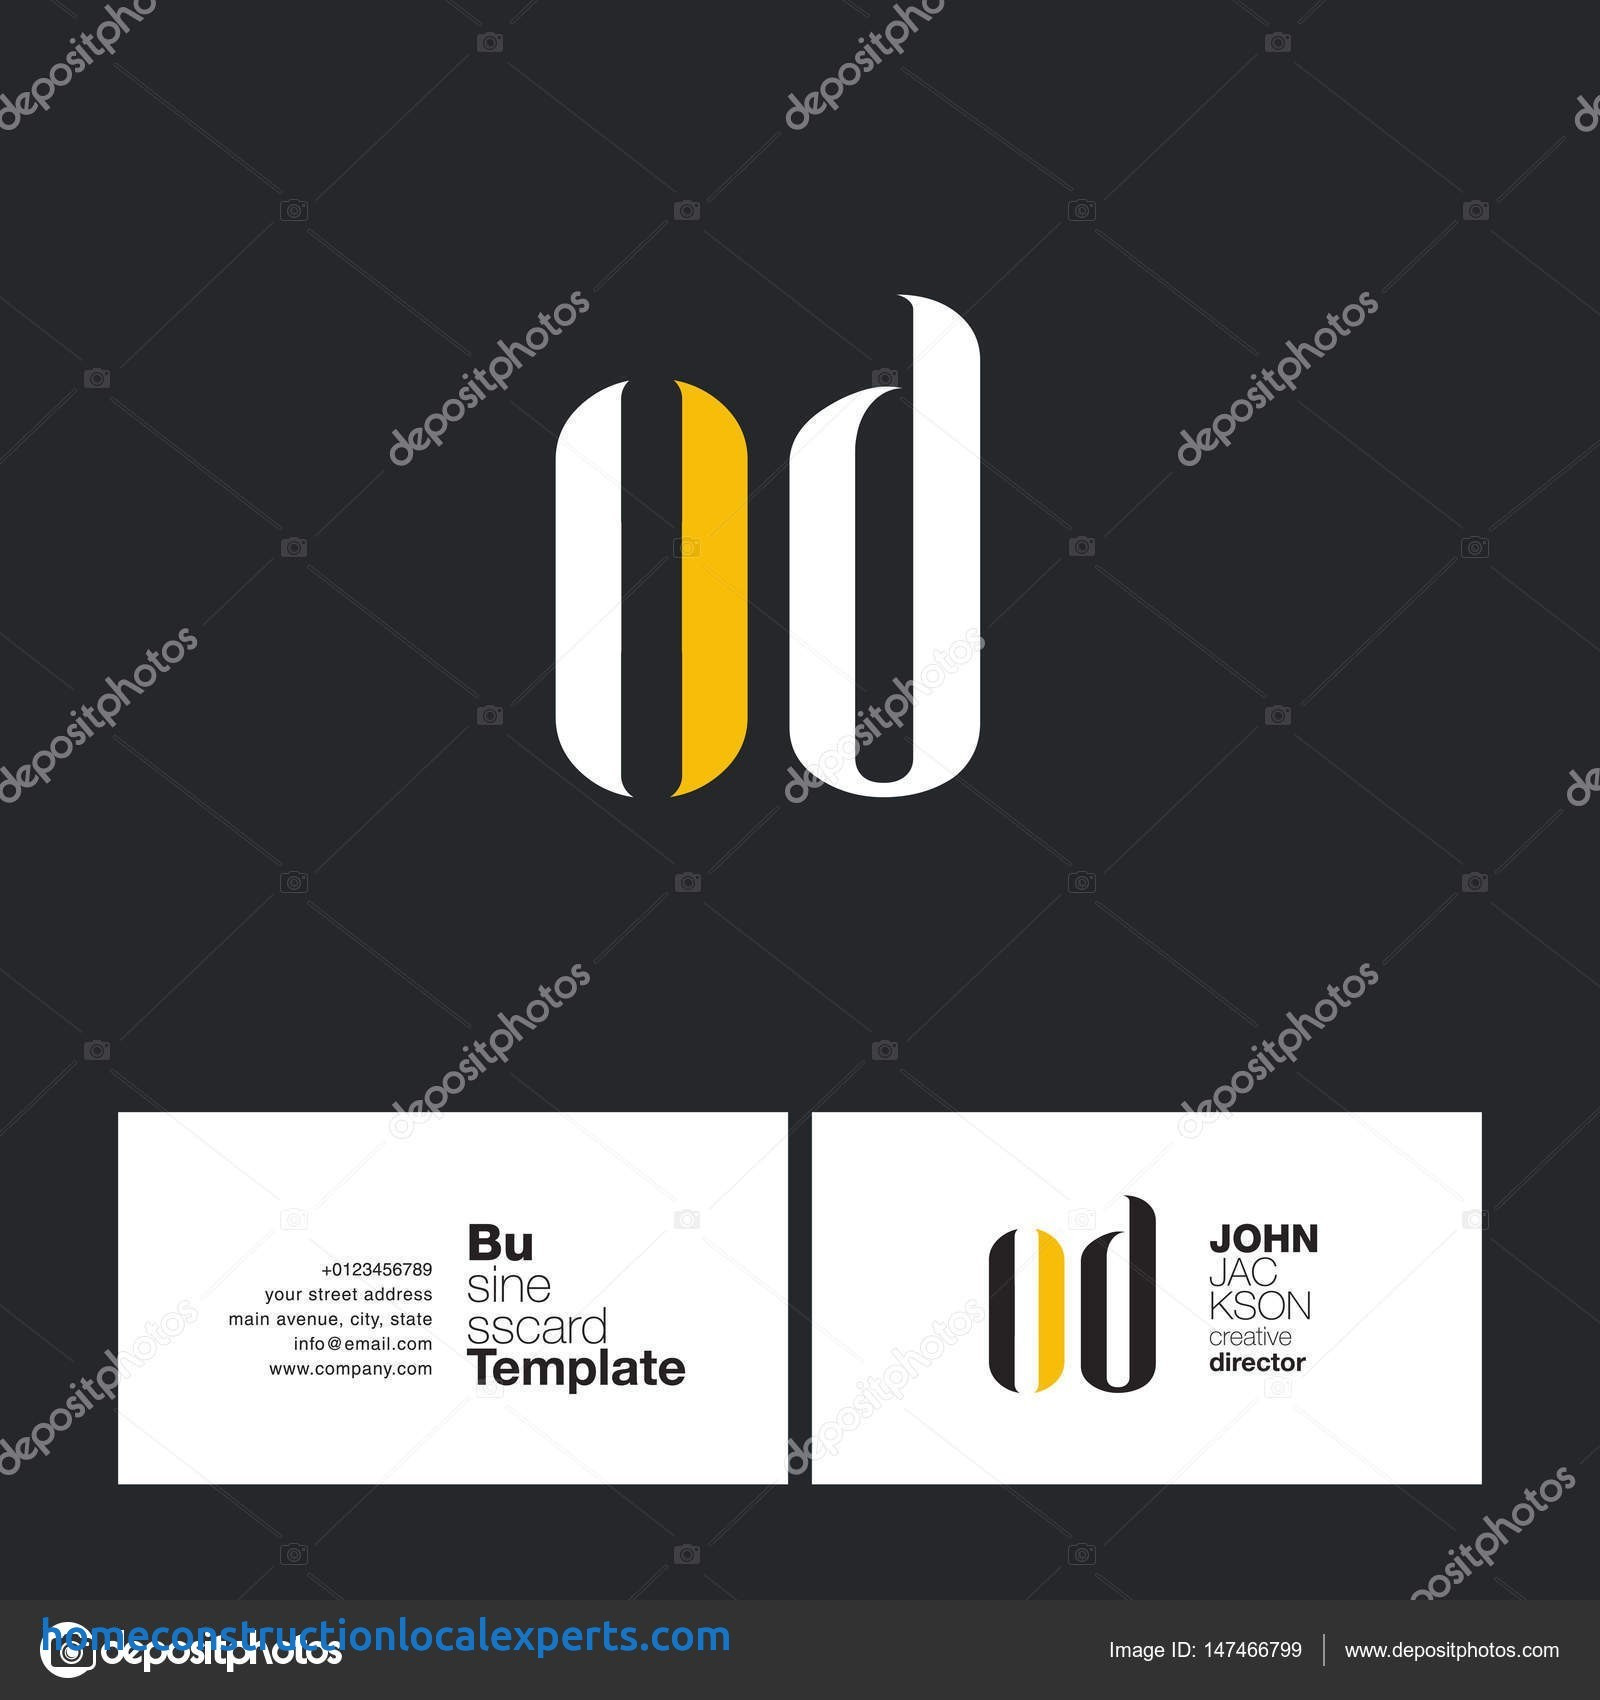 Visiting Card Maker Free New Design Electronic Business Card Of Business Card Template Maker